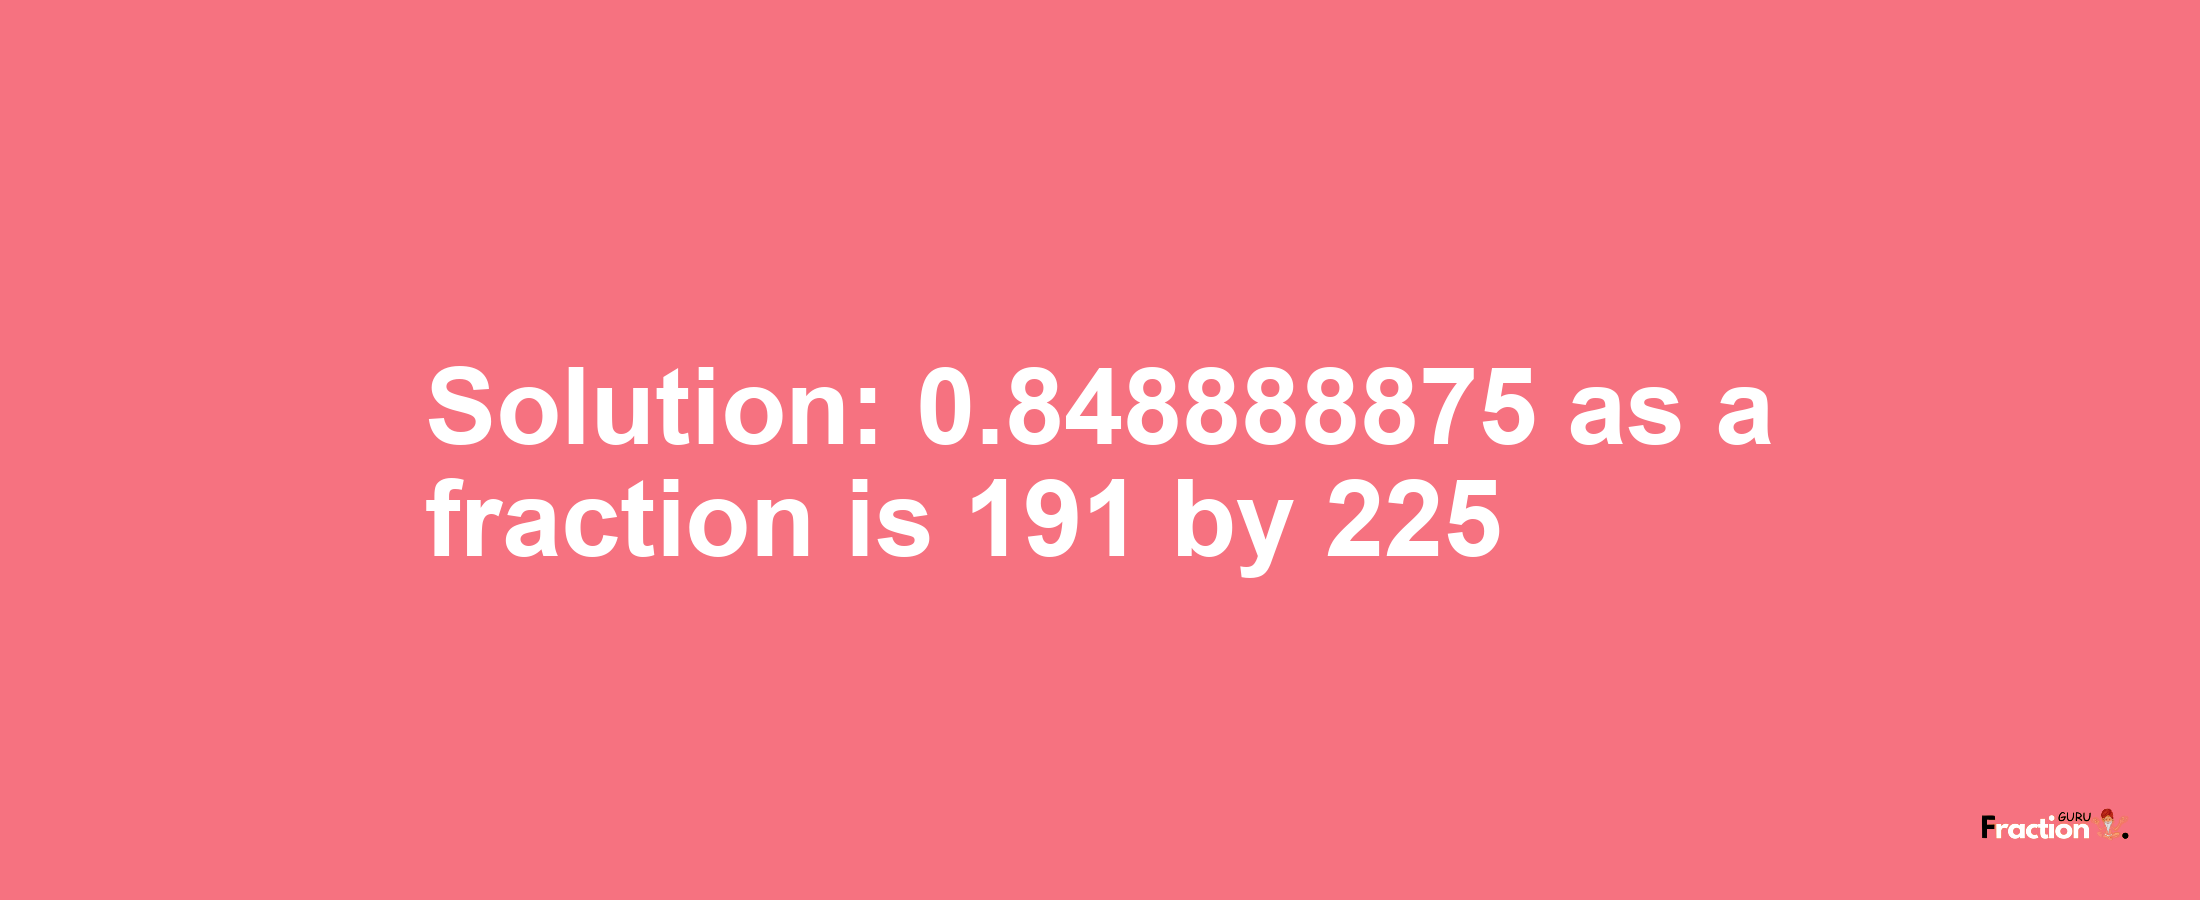 Solution:0.848888875 as a fraction is 191/225